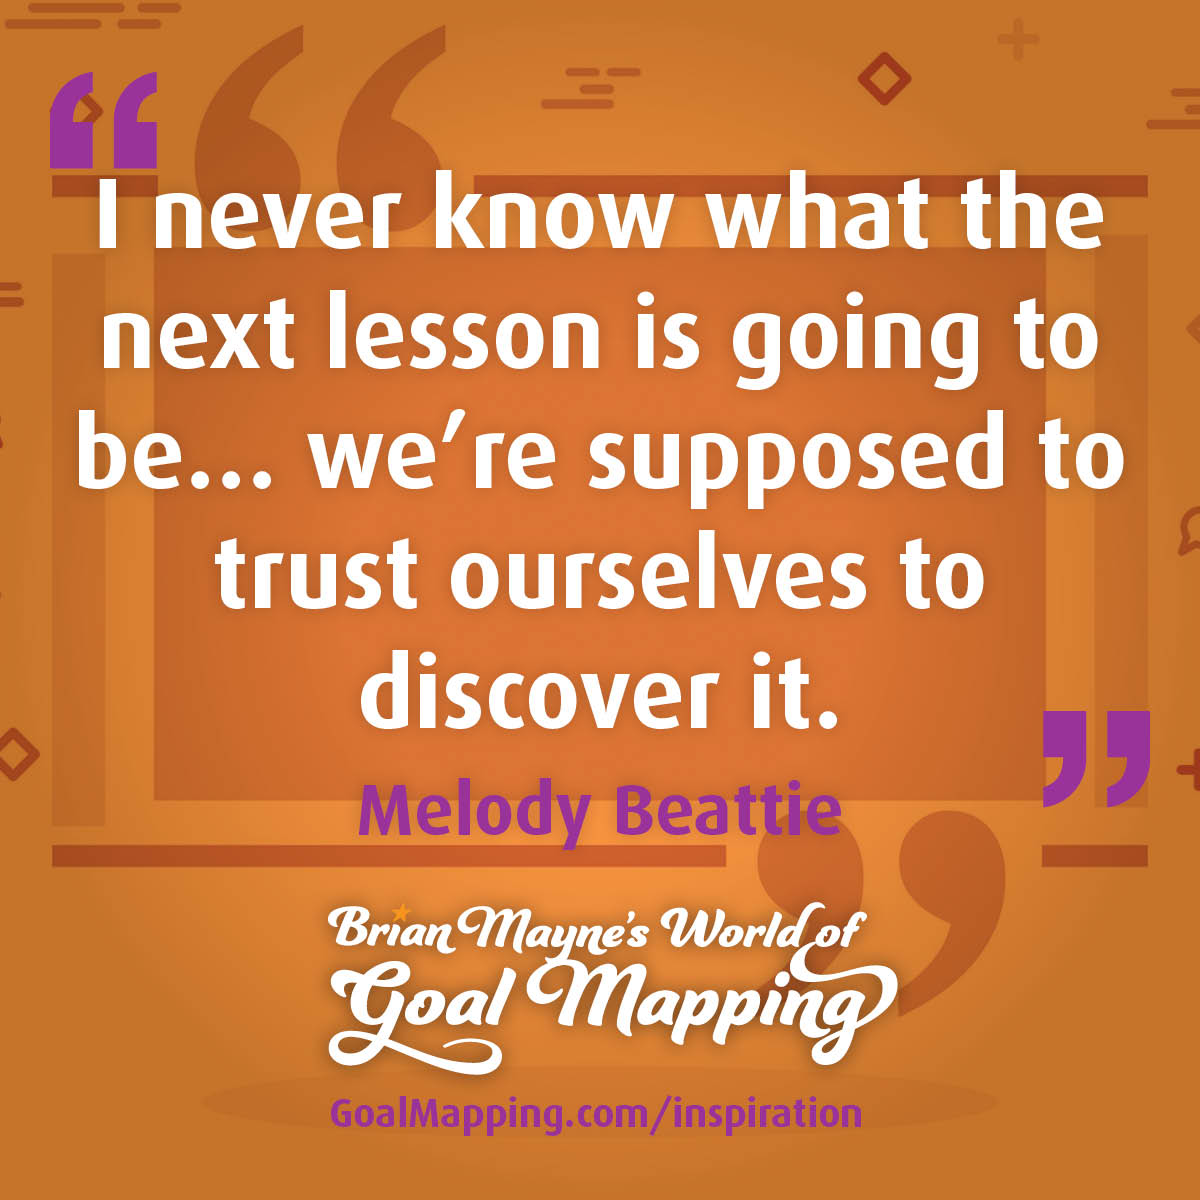 "I never know what the next lesson is going to be…we’re supposed to trust ourselves to discover it." Melody Beattie